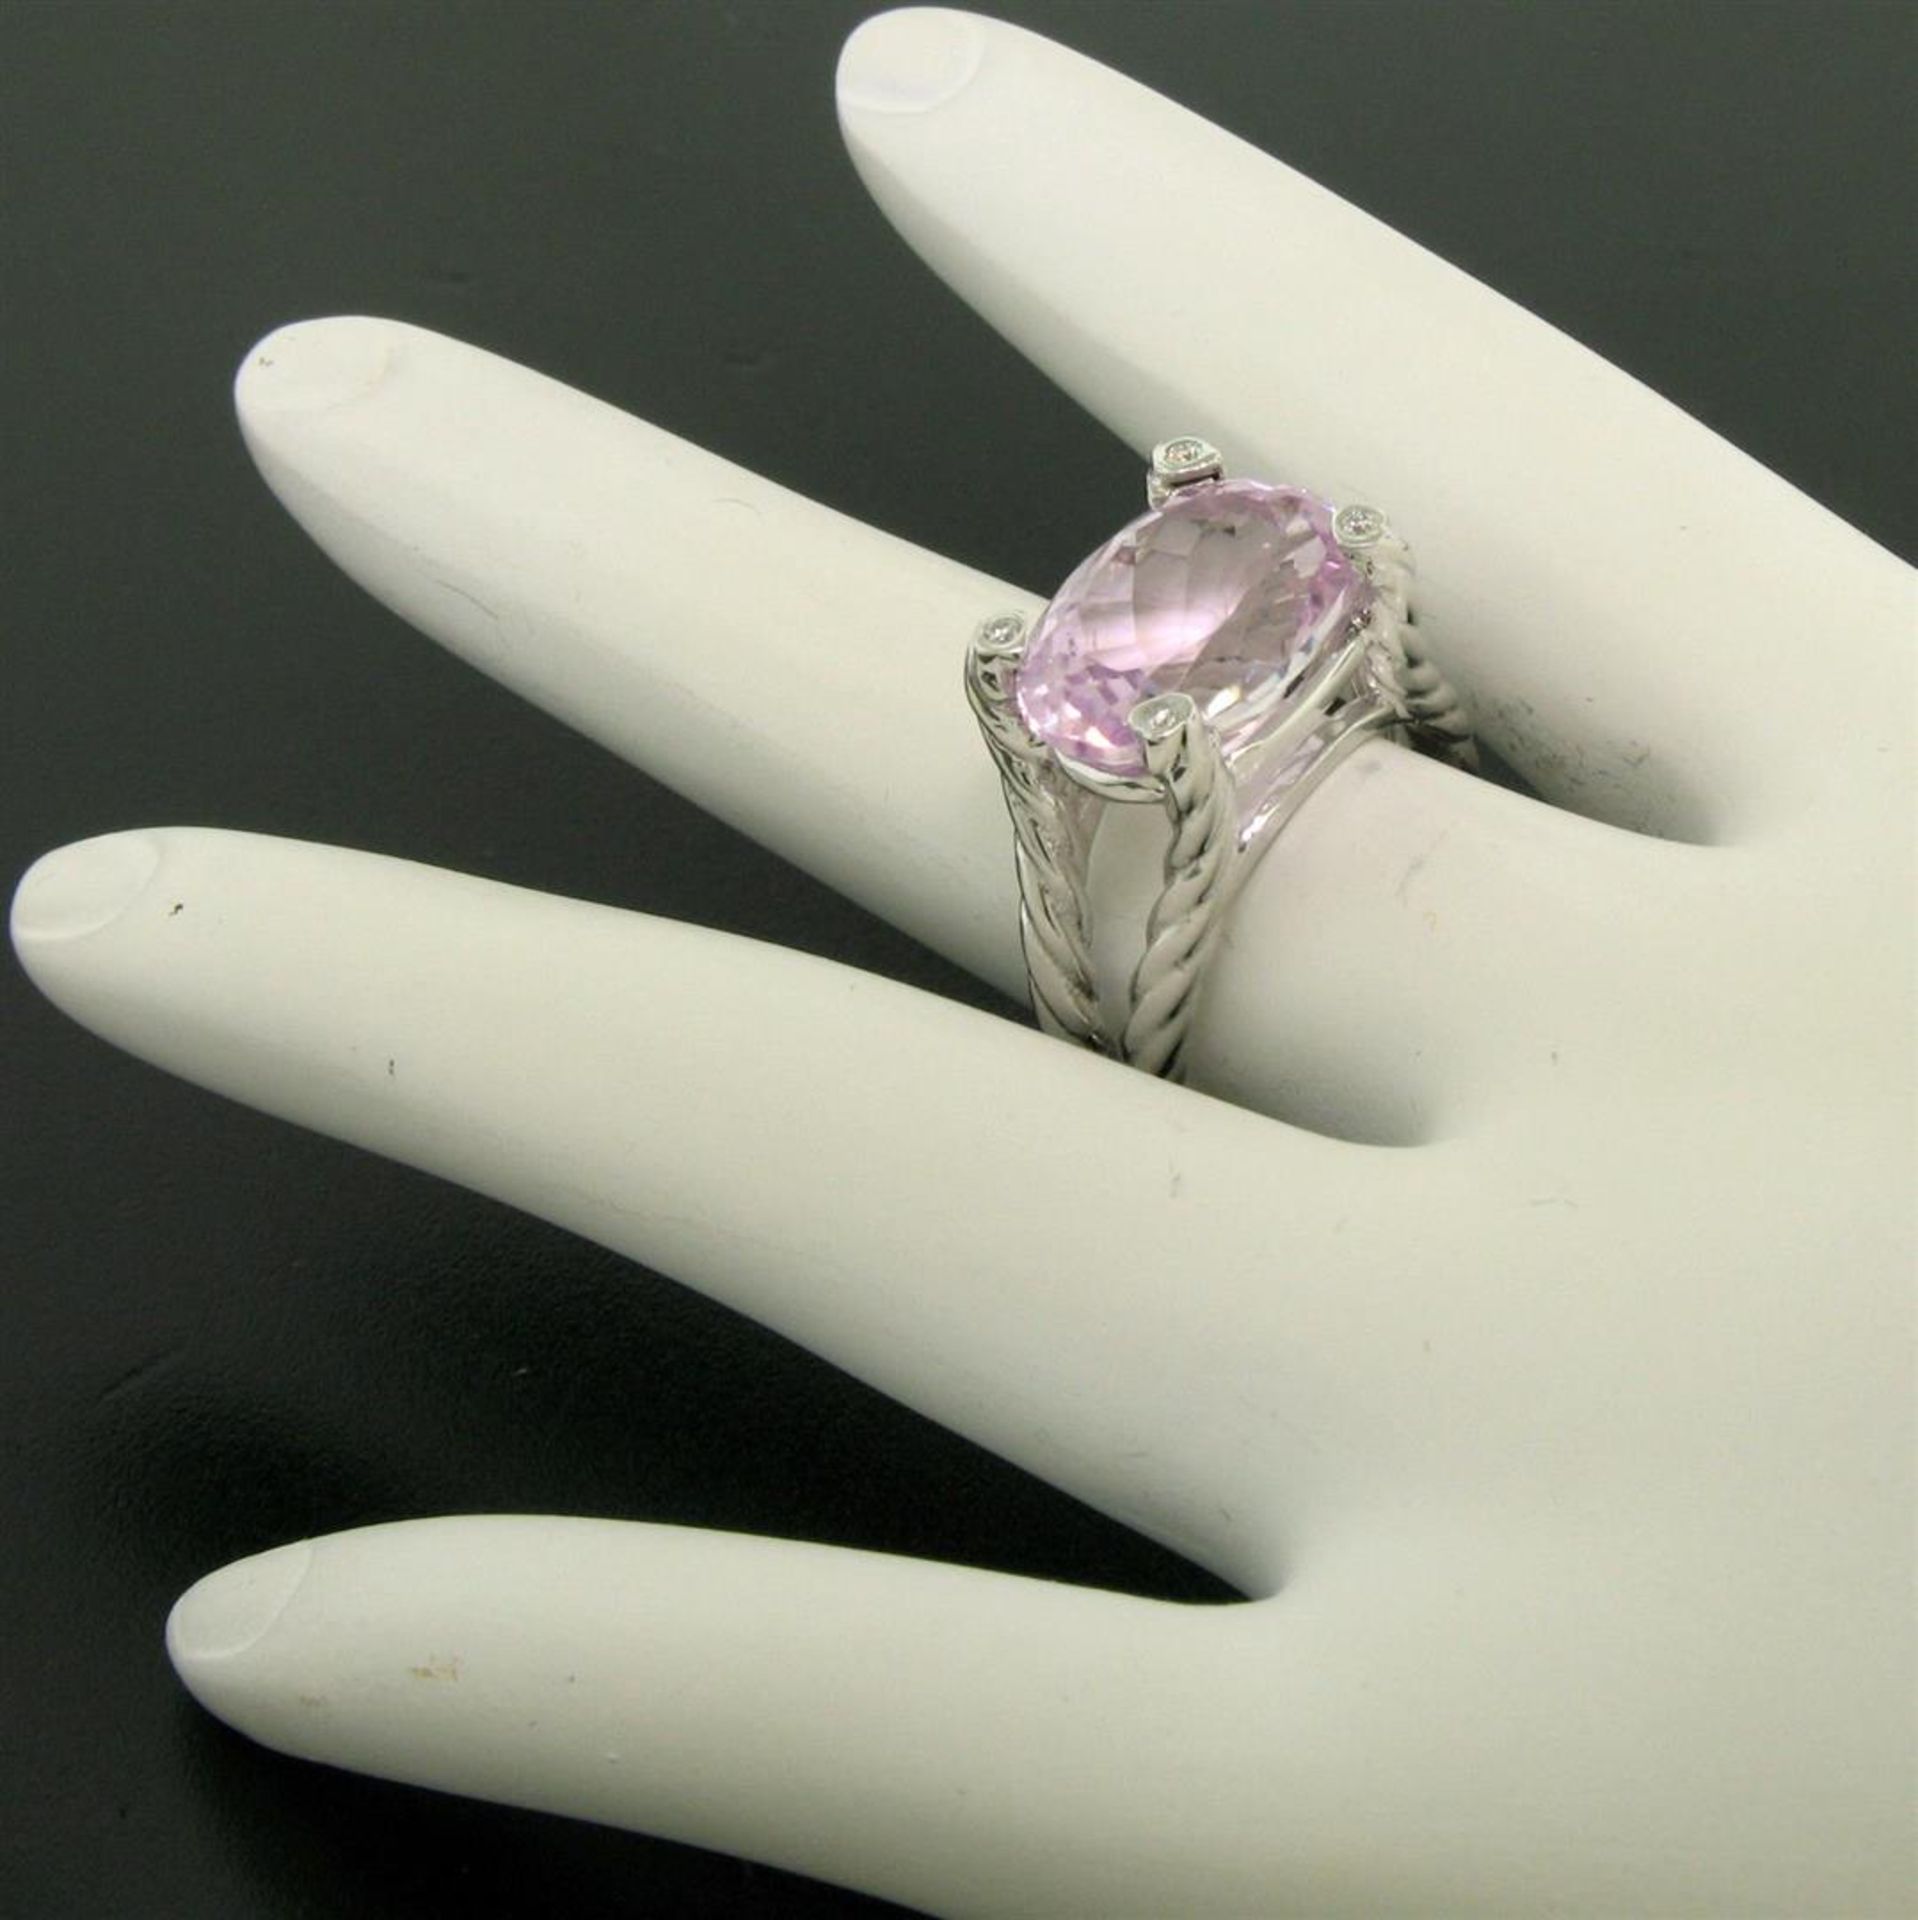 14k White Gold Twisted Cable 8.5 ct Oval Kunzite Solitaire Ring 4 Diamond Accent - Image 7 of 8